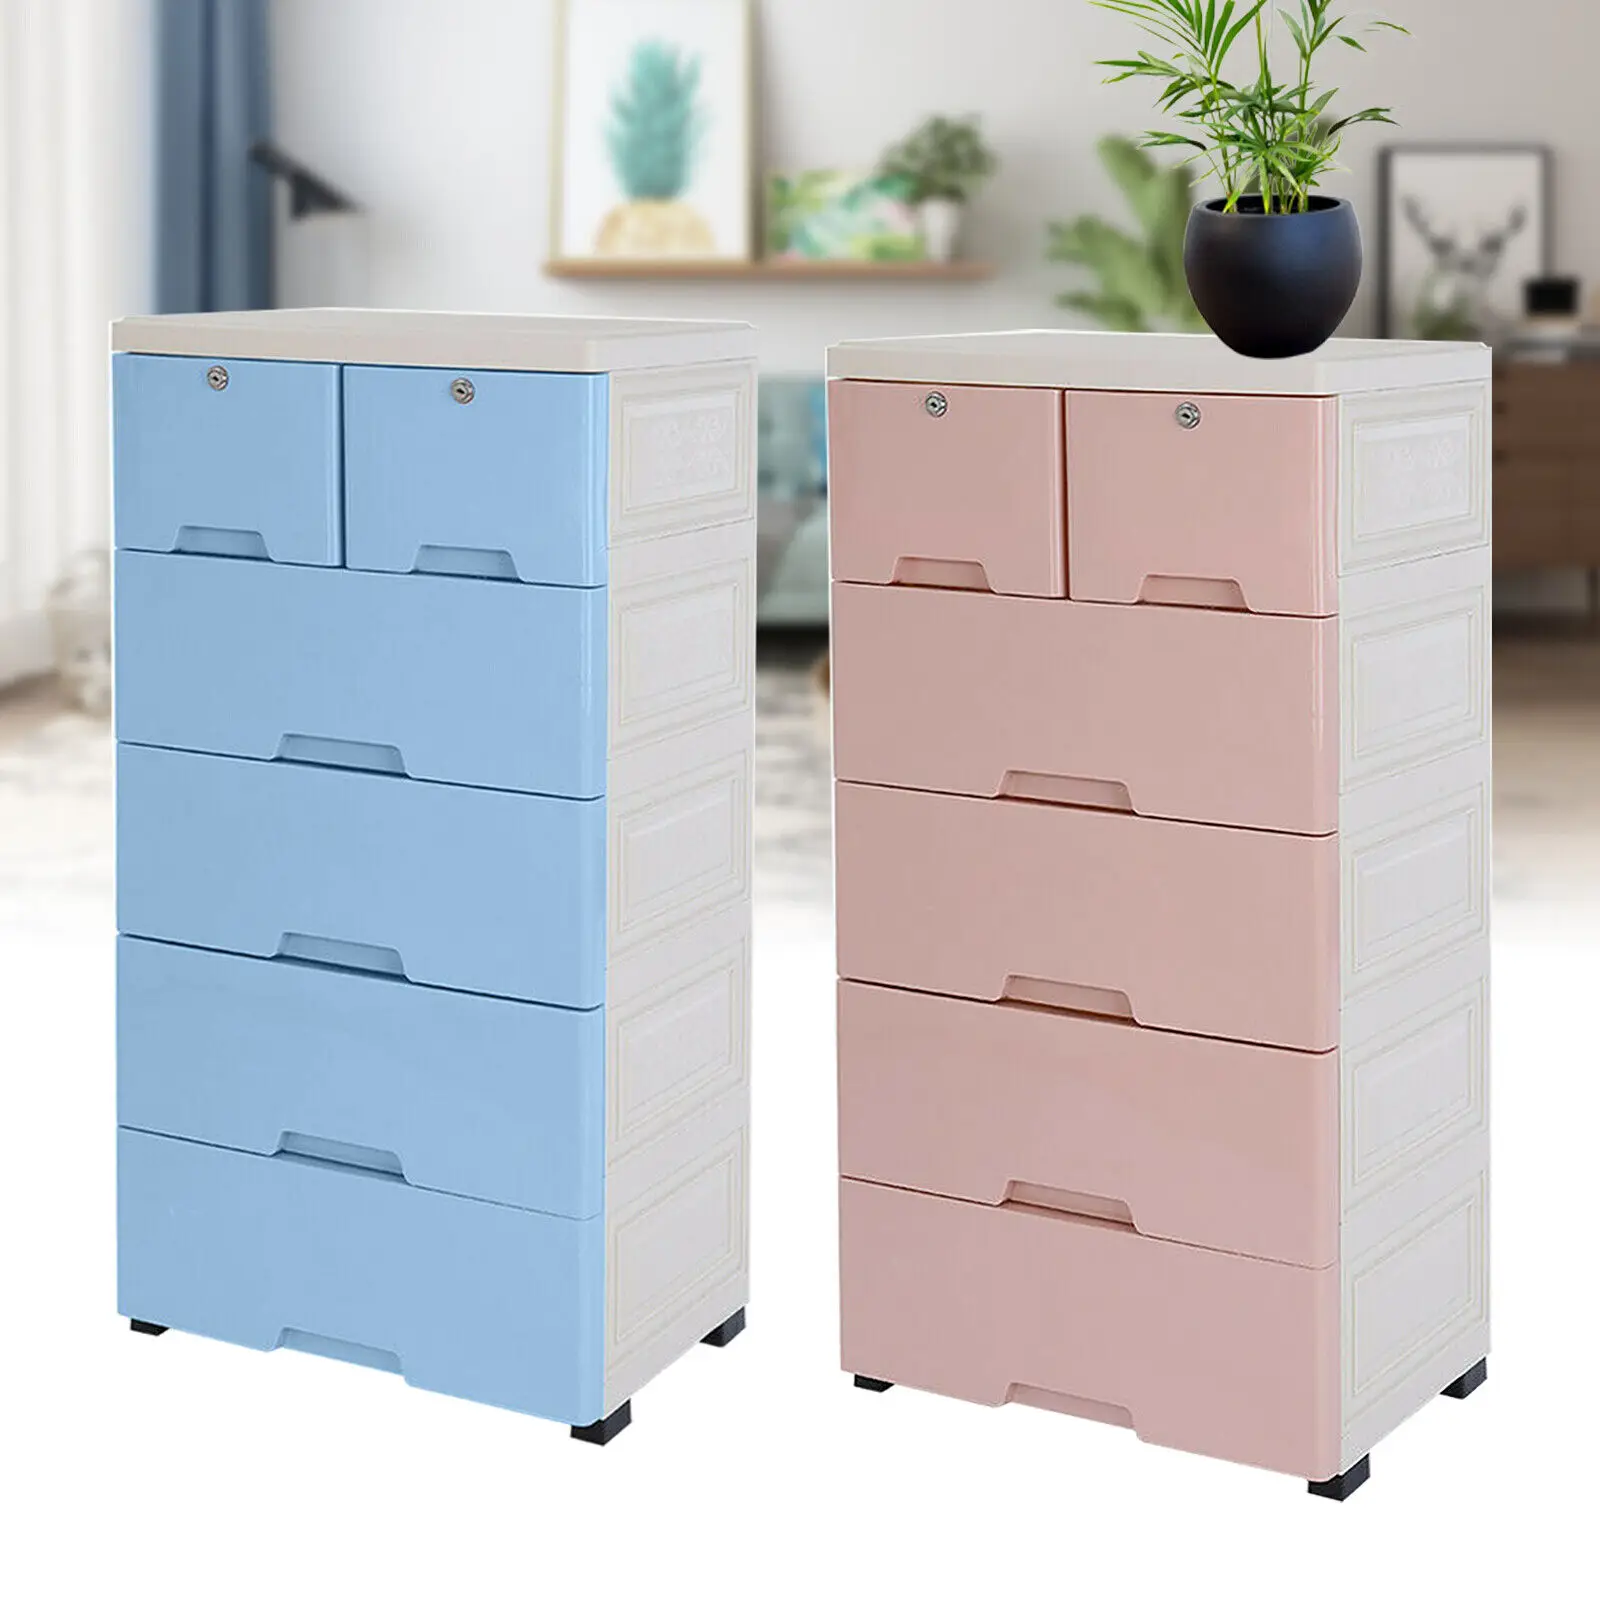 https://ae01.alicdn.com/kf/S28bd040279cf492590ca8f61c44c7629h/Storage-Cabinet-with-6-Drawers-Closet-Drawers-Tall-Dresser-Organizer-for-Clothes-Playroom-Bedroom-Furniture.jpg